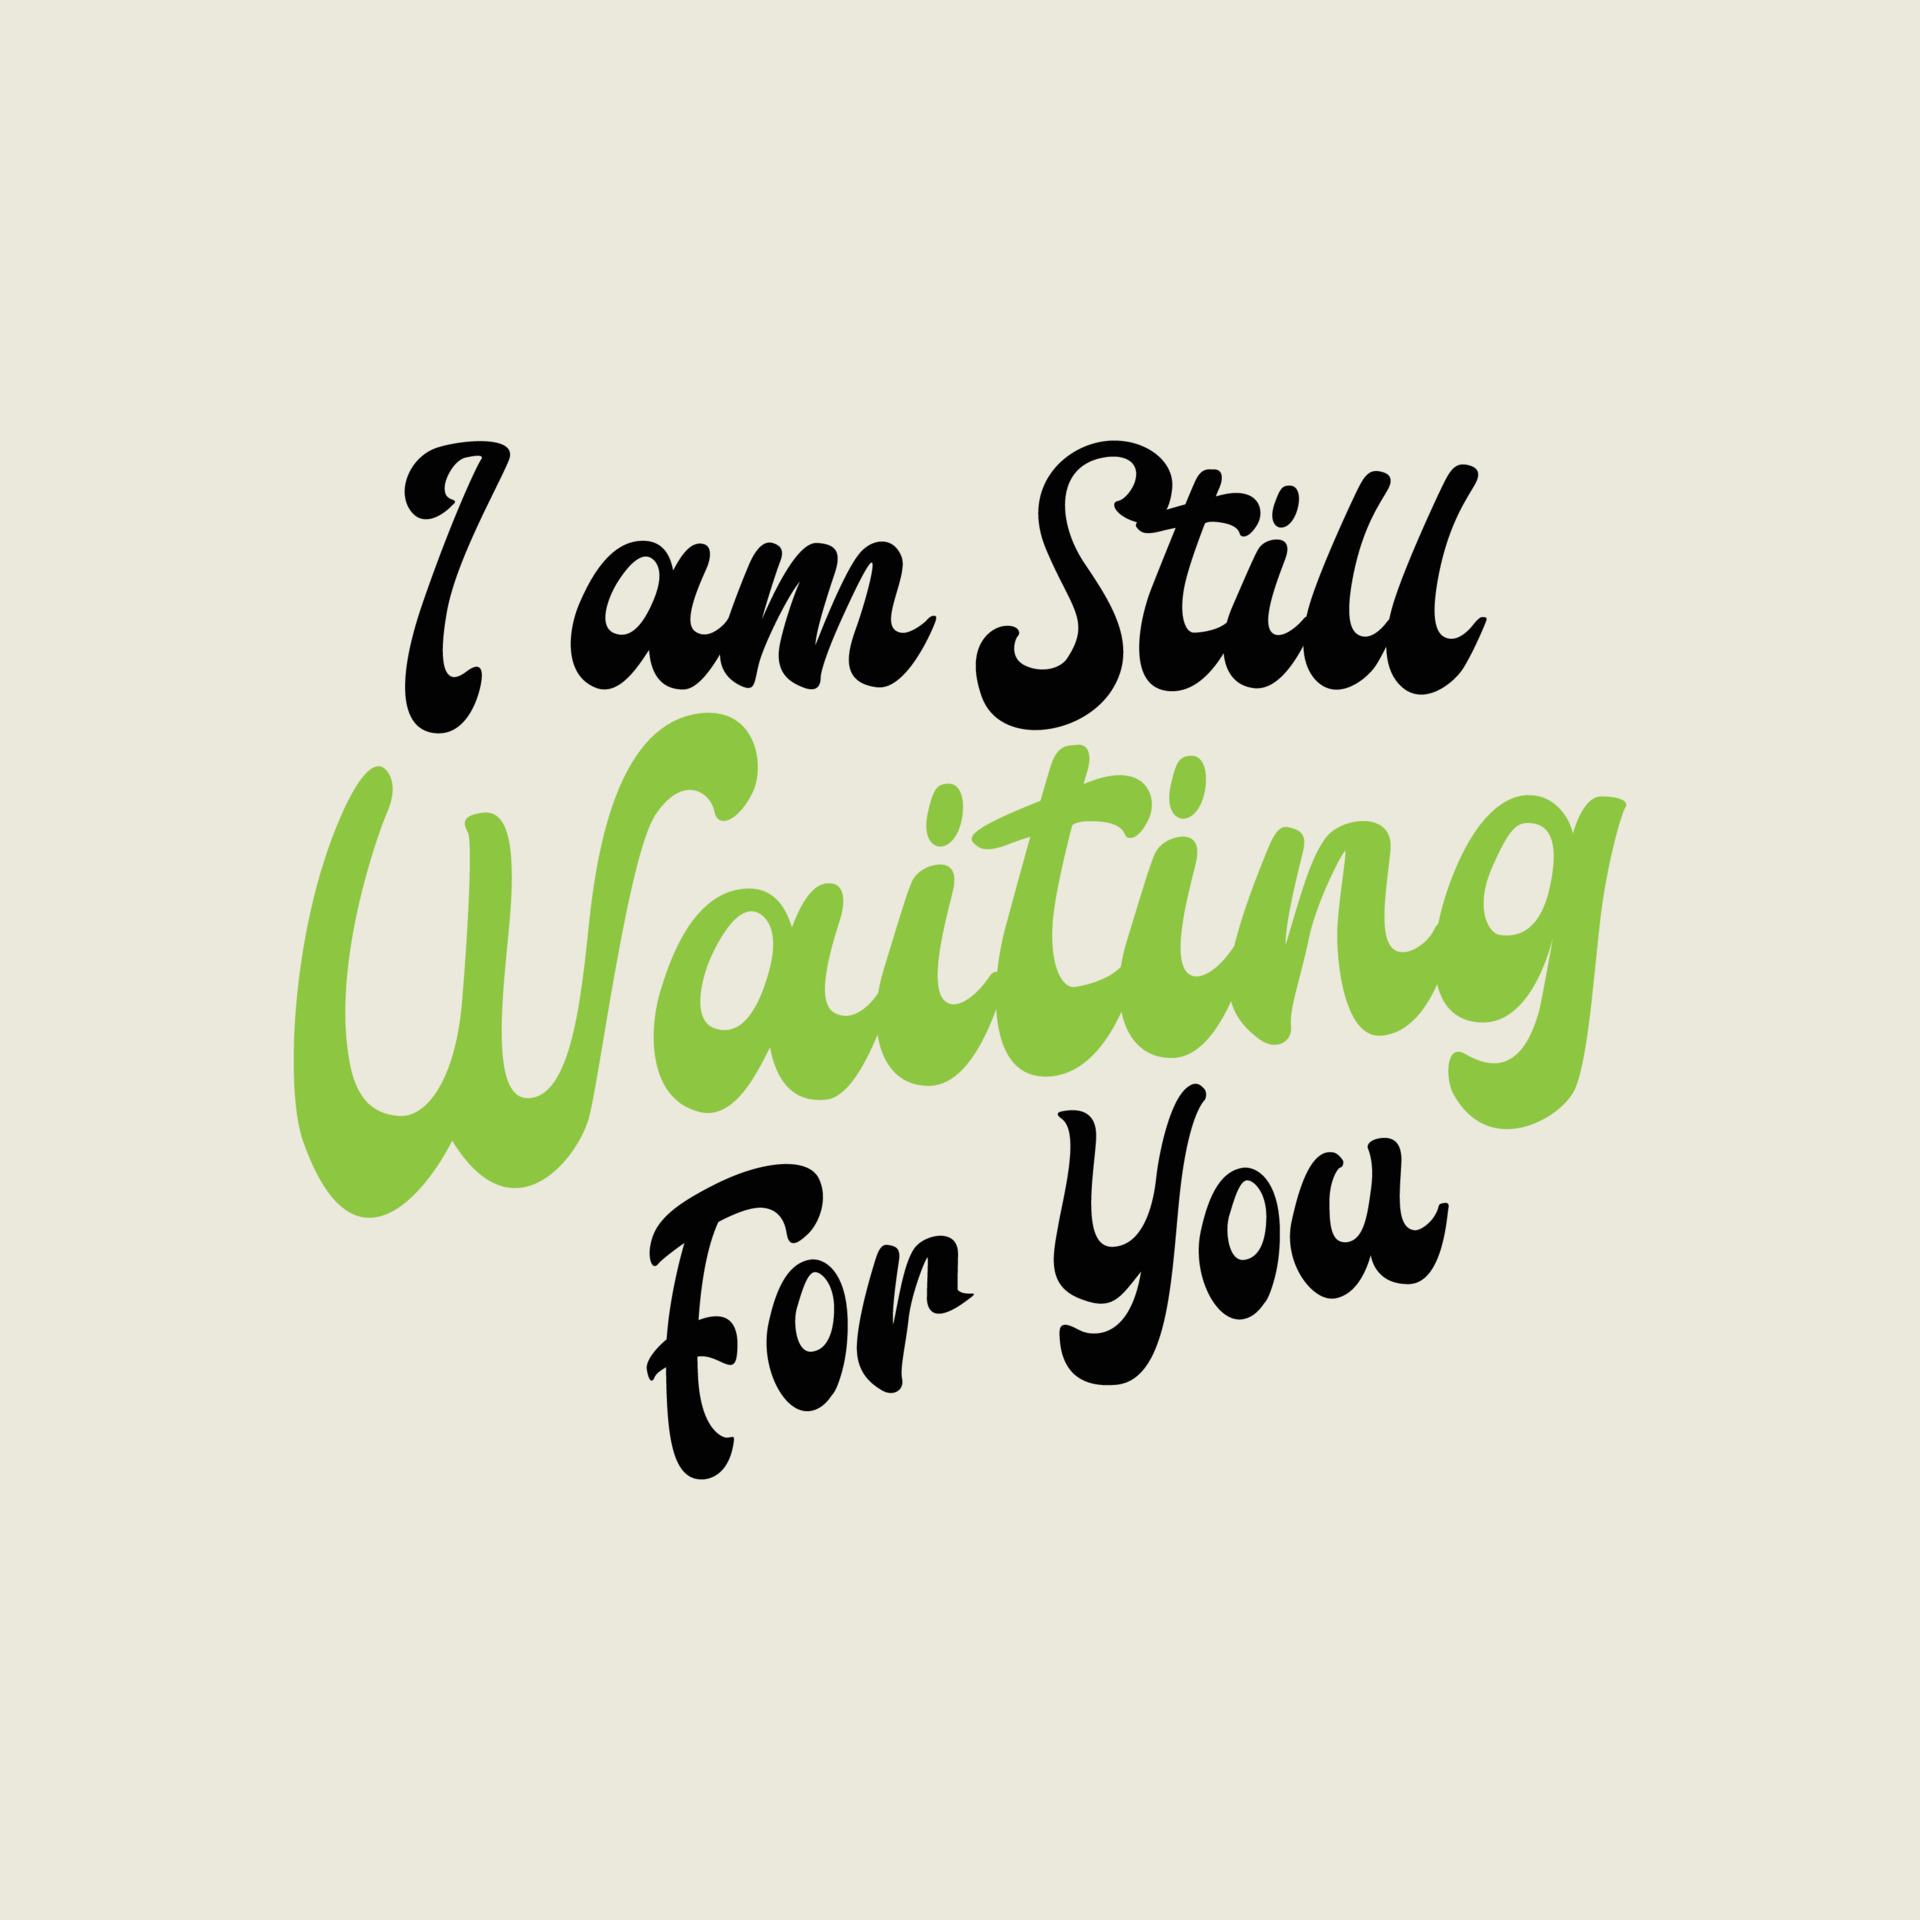 waiting for you quotes